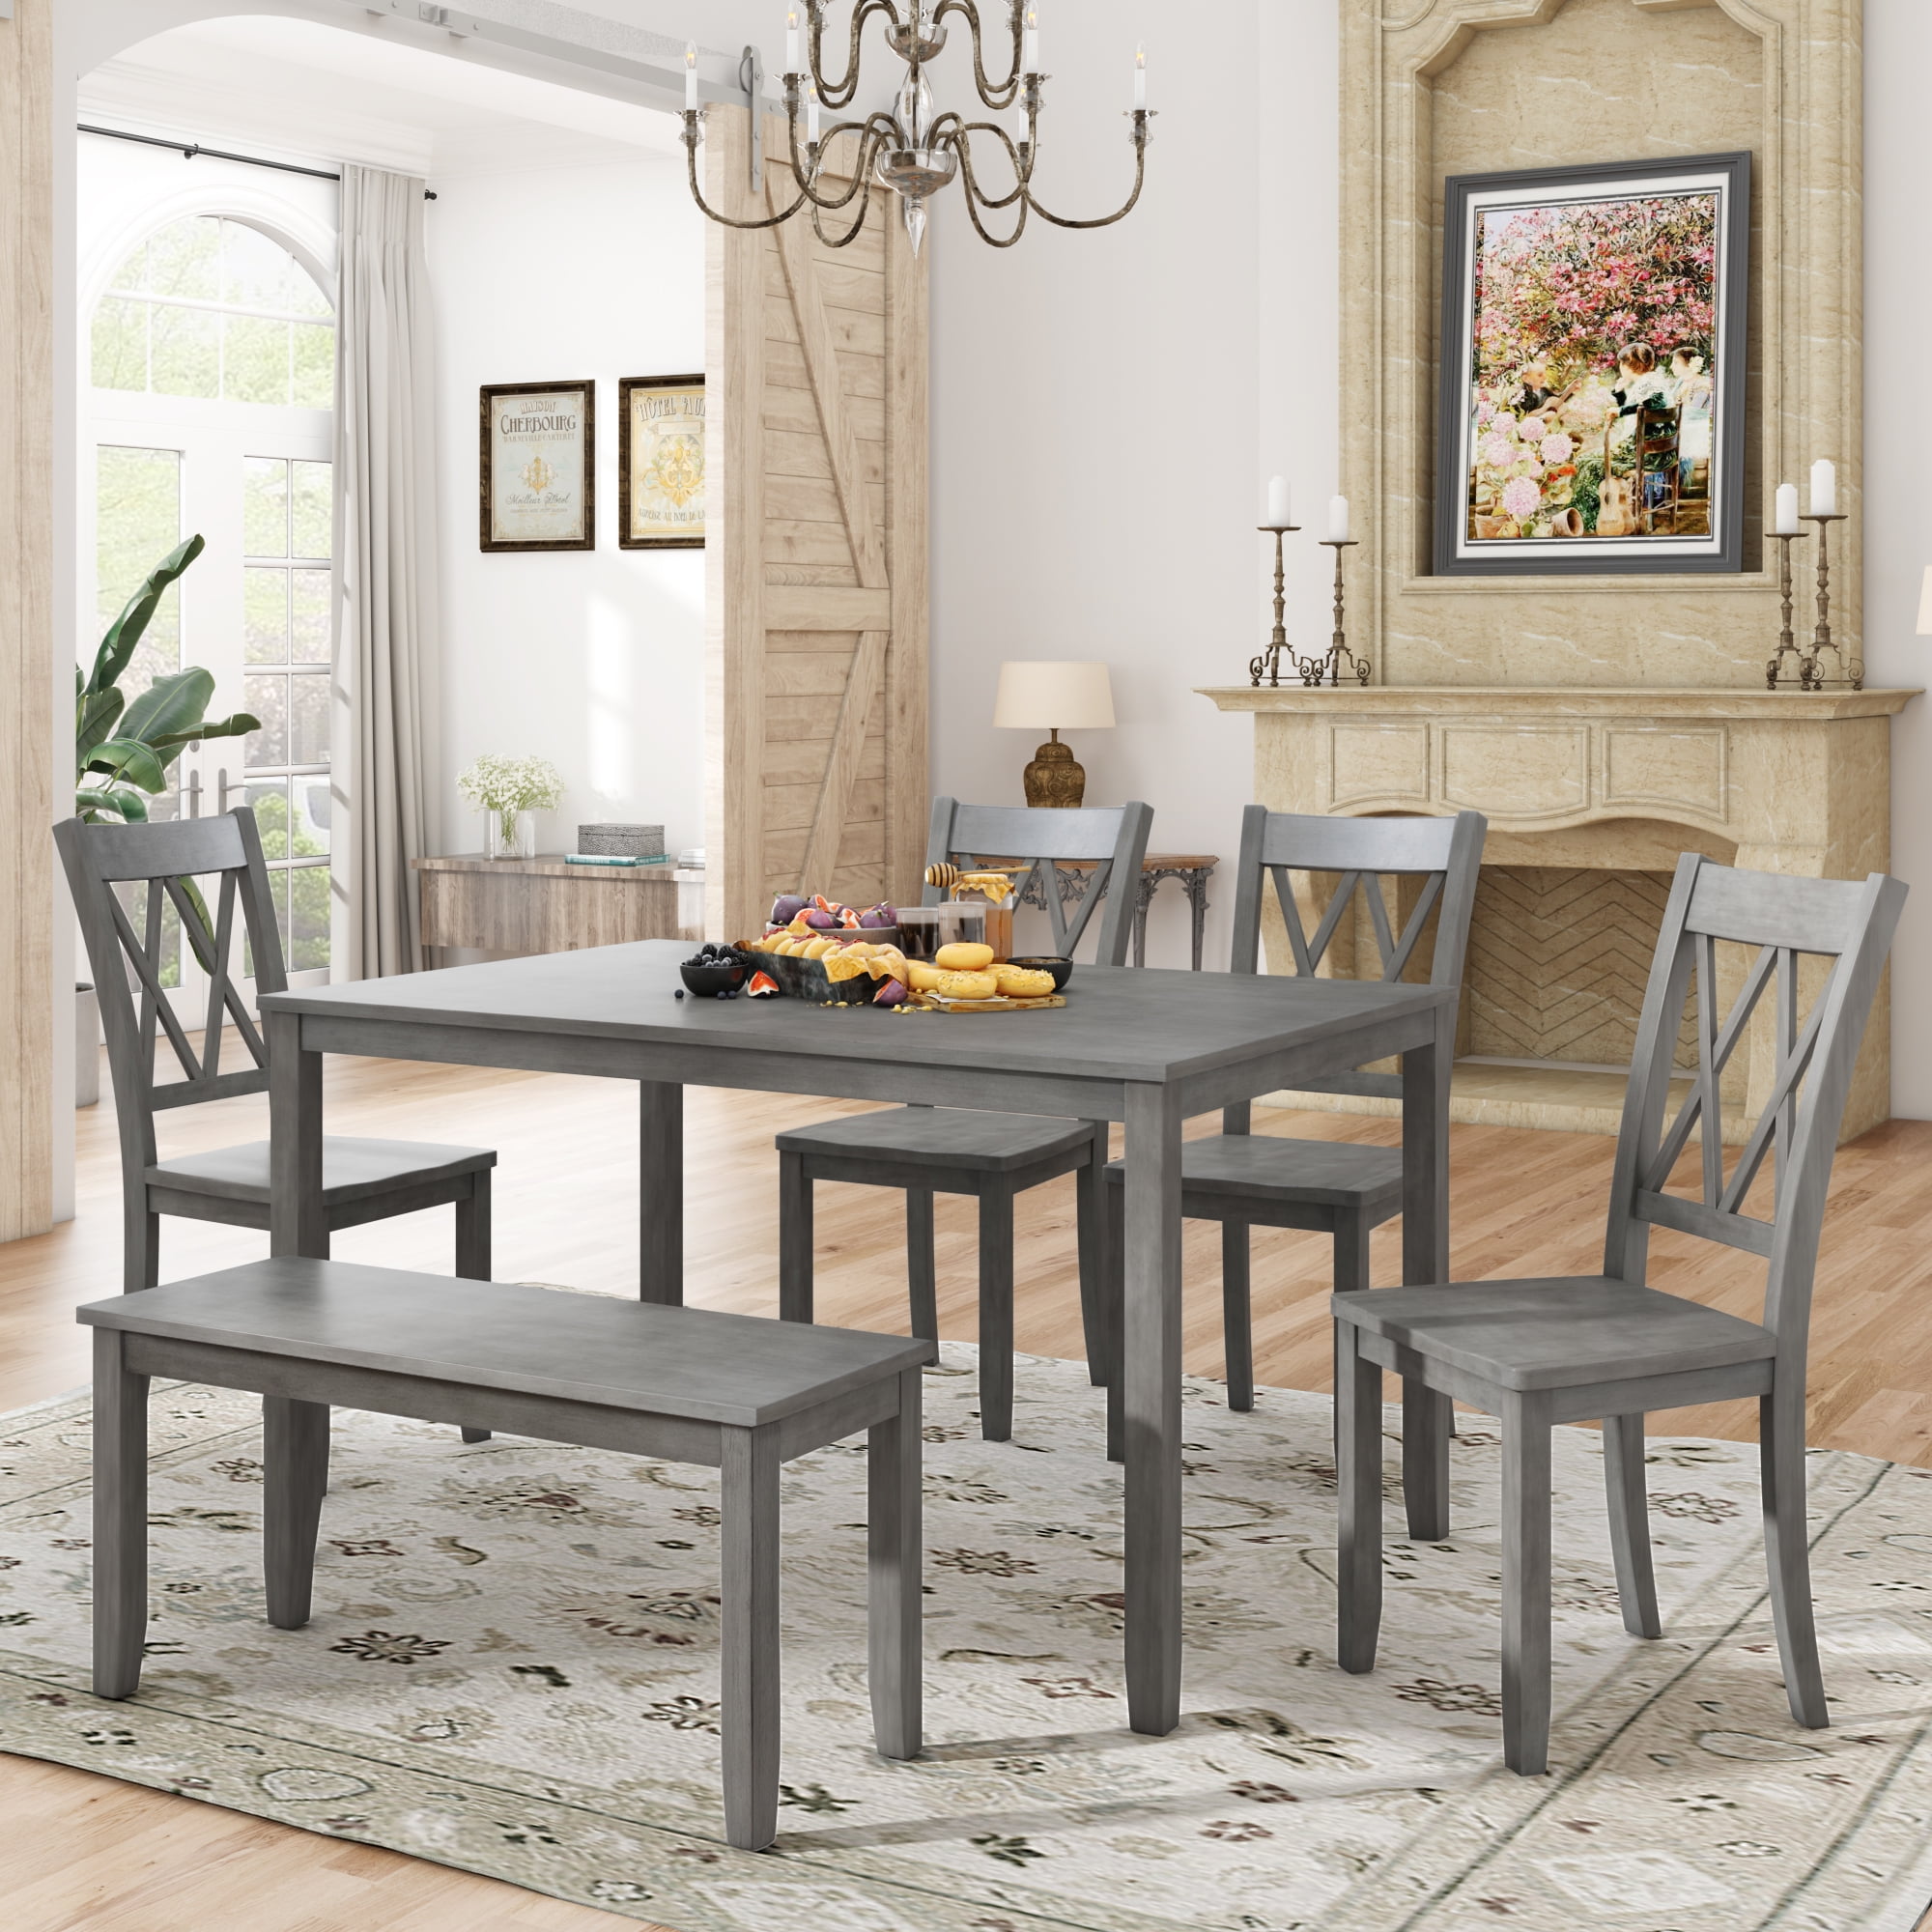 Kitchen Table Set For Dining Room, Dining Room Table And Chairs With Bench Set Of 6